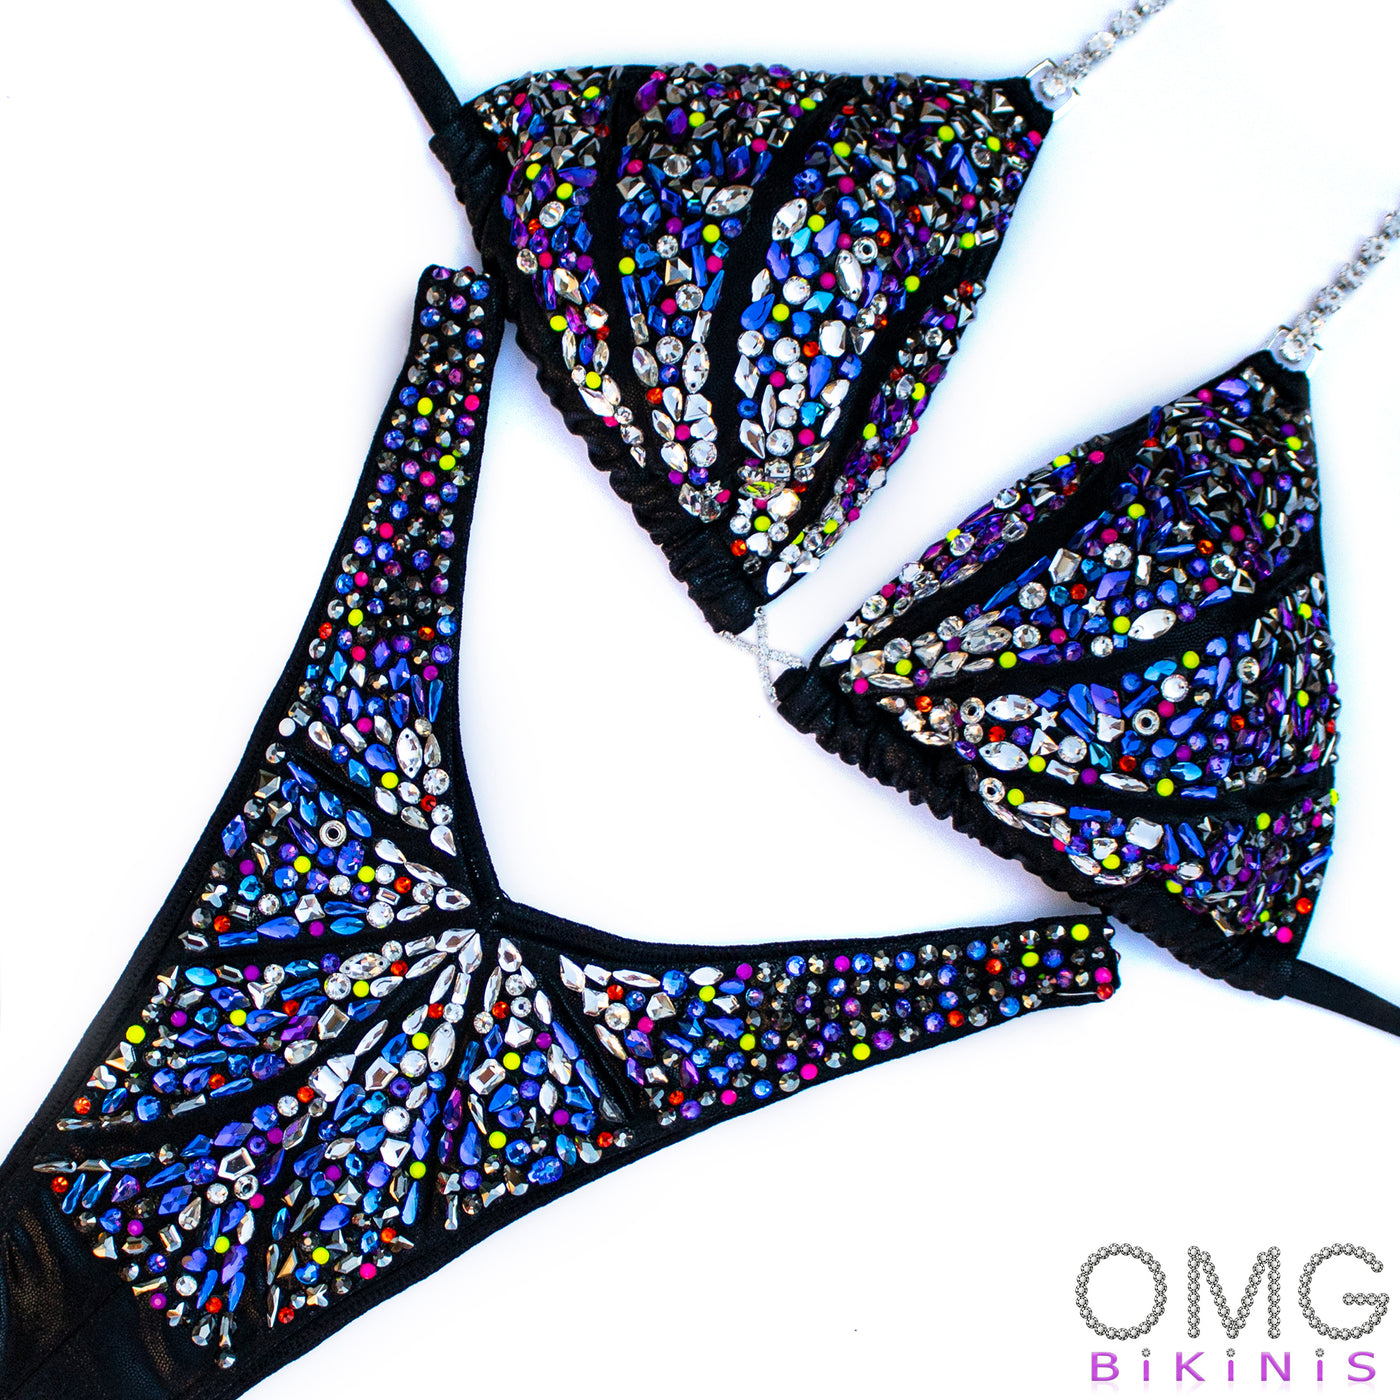 Valencia Figure/WPD Competition Suit S/S | OMG Bikinis Rentals